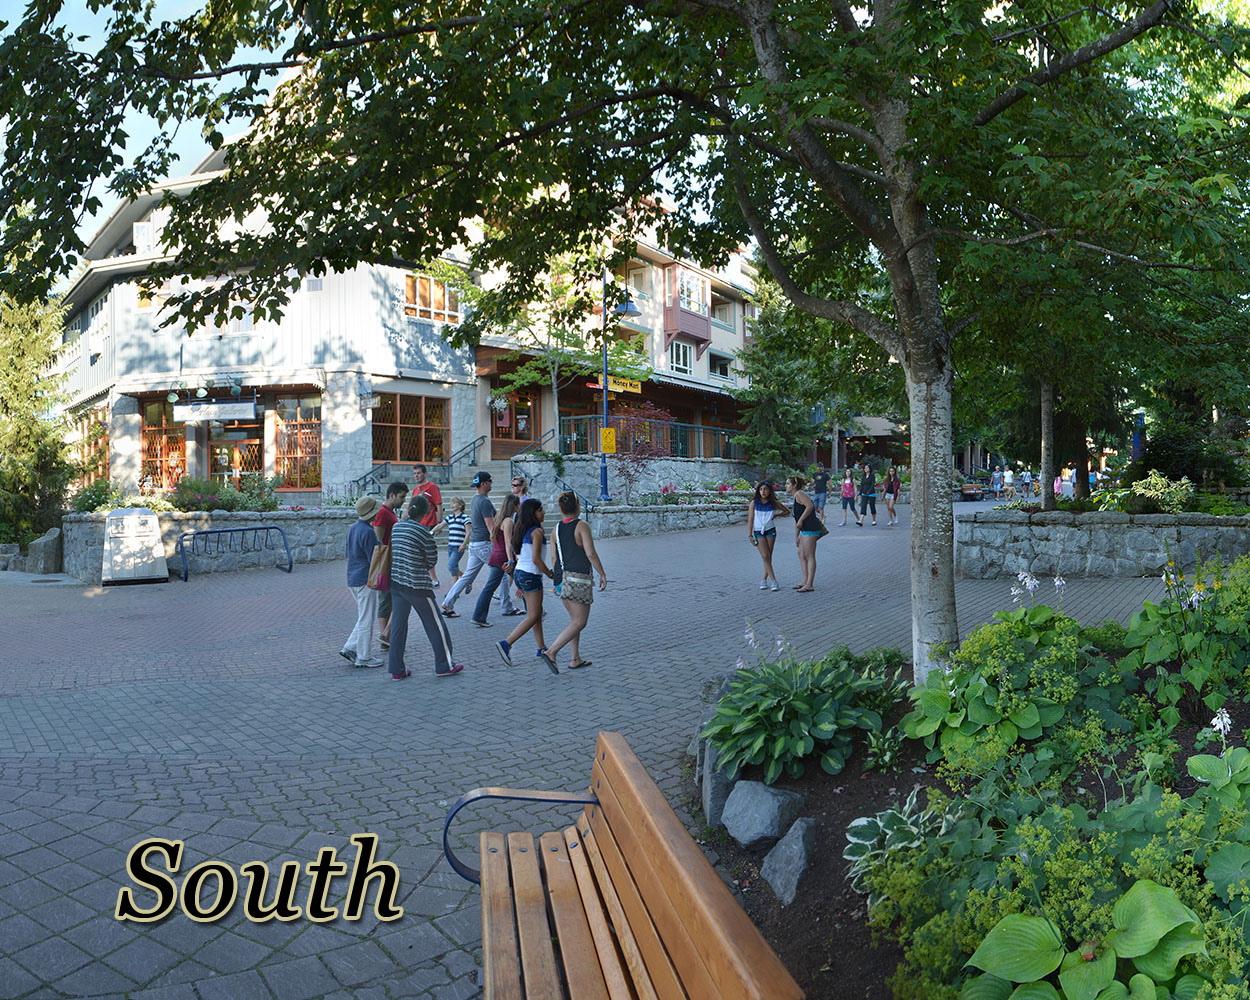 South Olympic Square